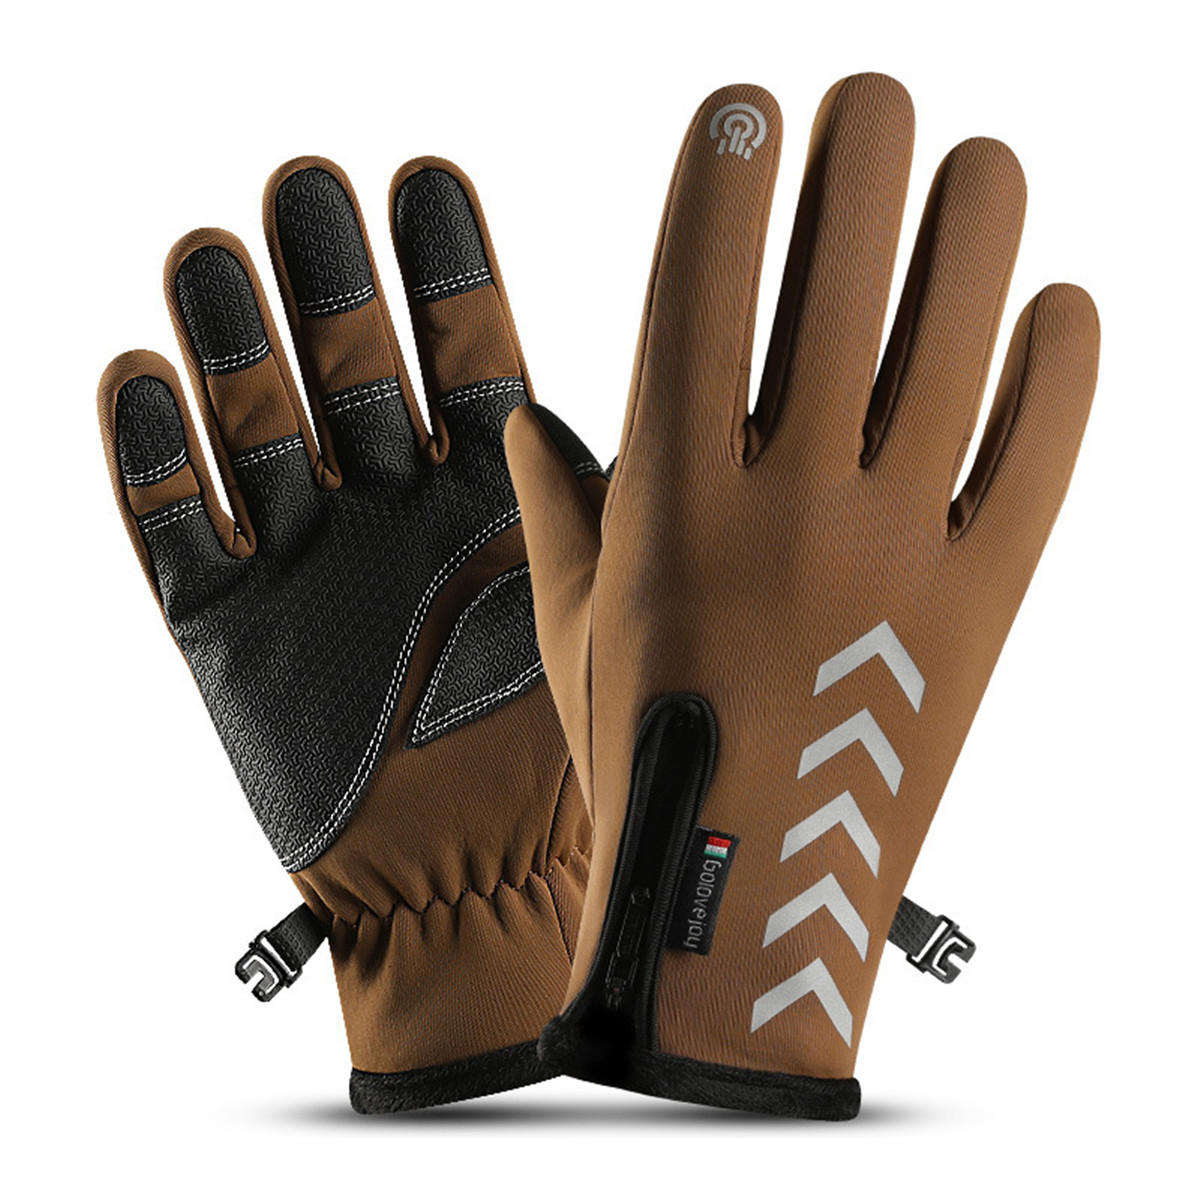 Wind-stoper Gloves Anti-slip Windproof Thermal Warm Touchscreen Breathable Skiing Gloves